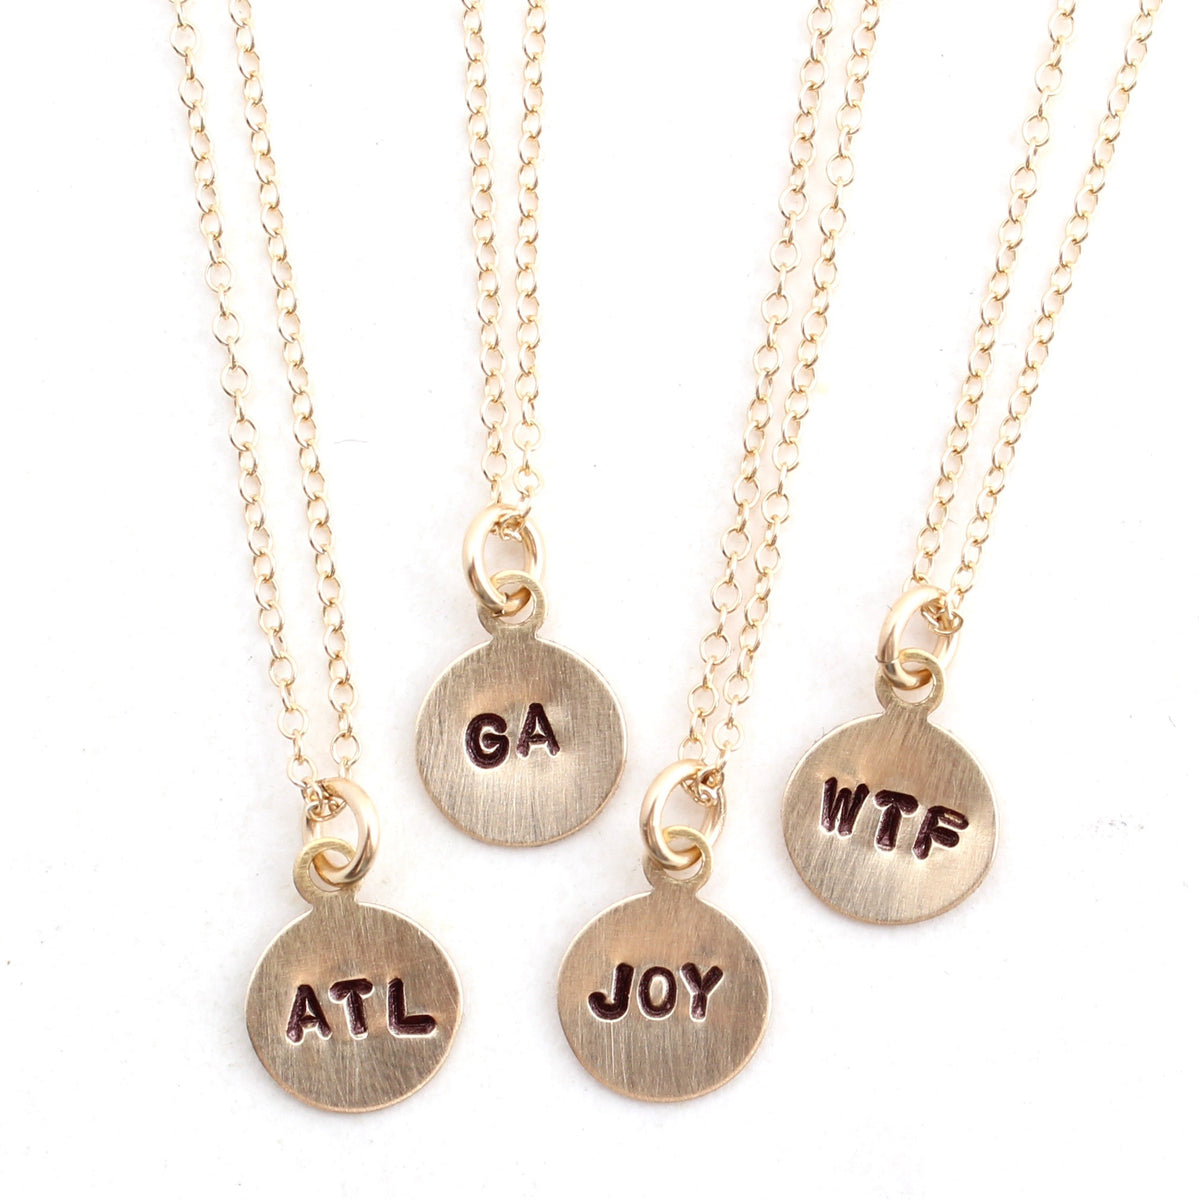 Stamped Phrase Necklace - Small